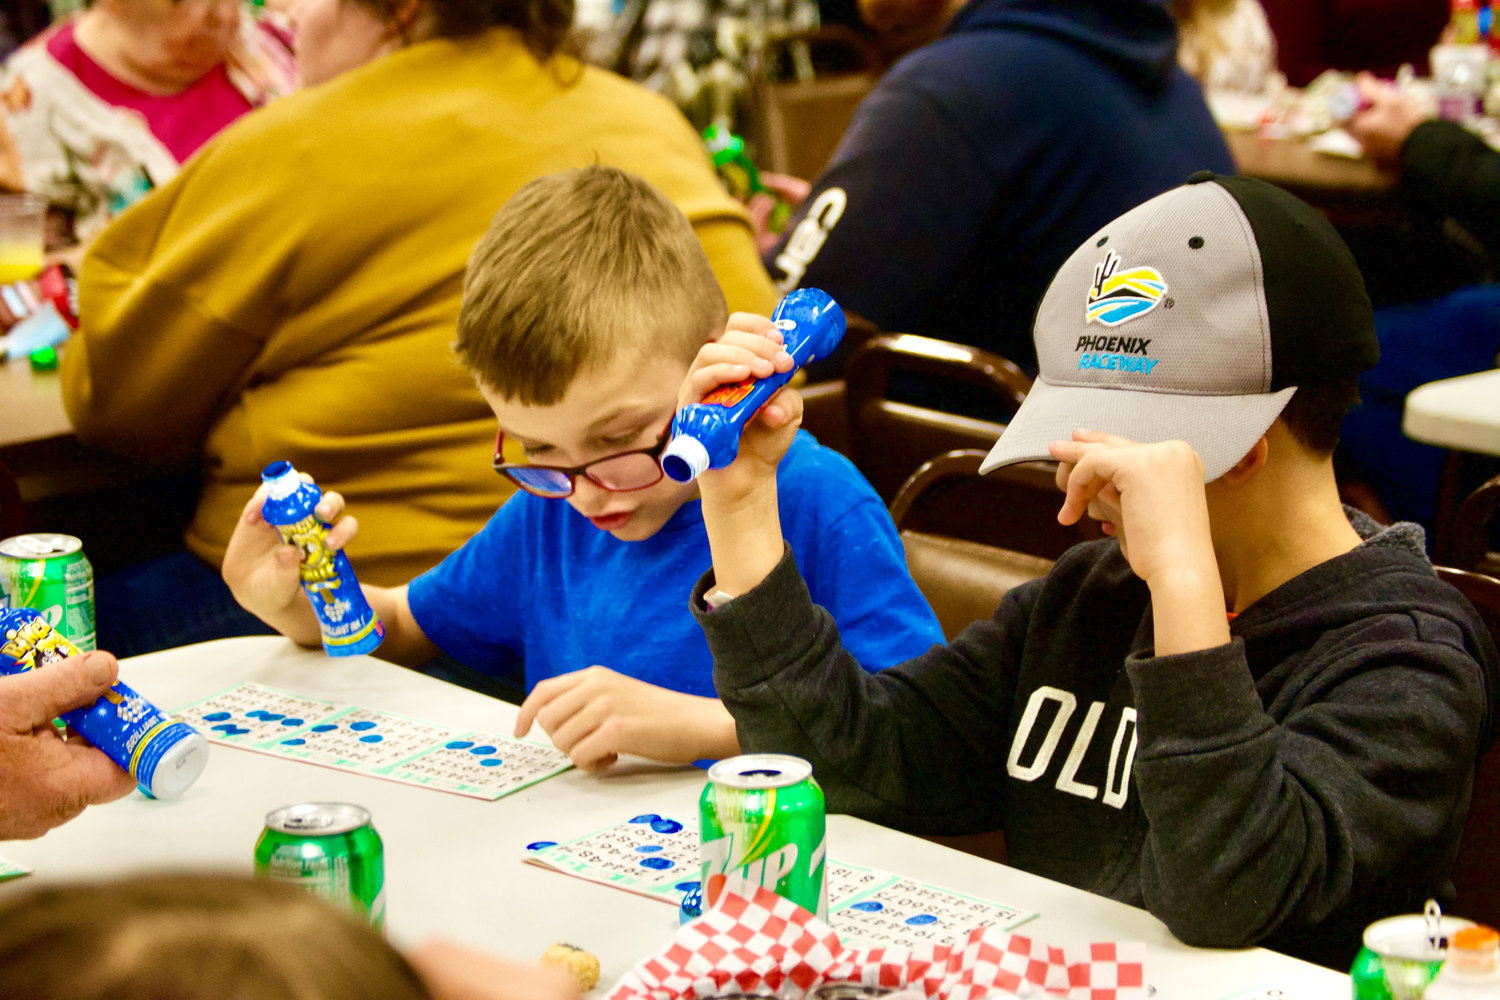 Two boys play turkey bingo Saturday night at the Chehalis Eagles event space. This is the first year guests of all ages were welcome at the Twin Cities Rotary event.